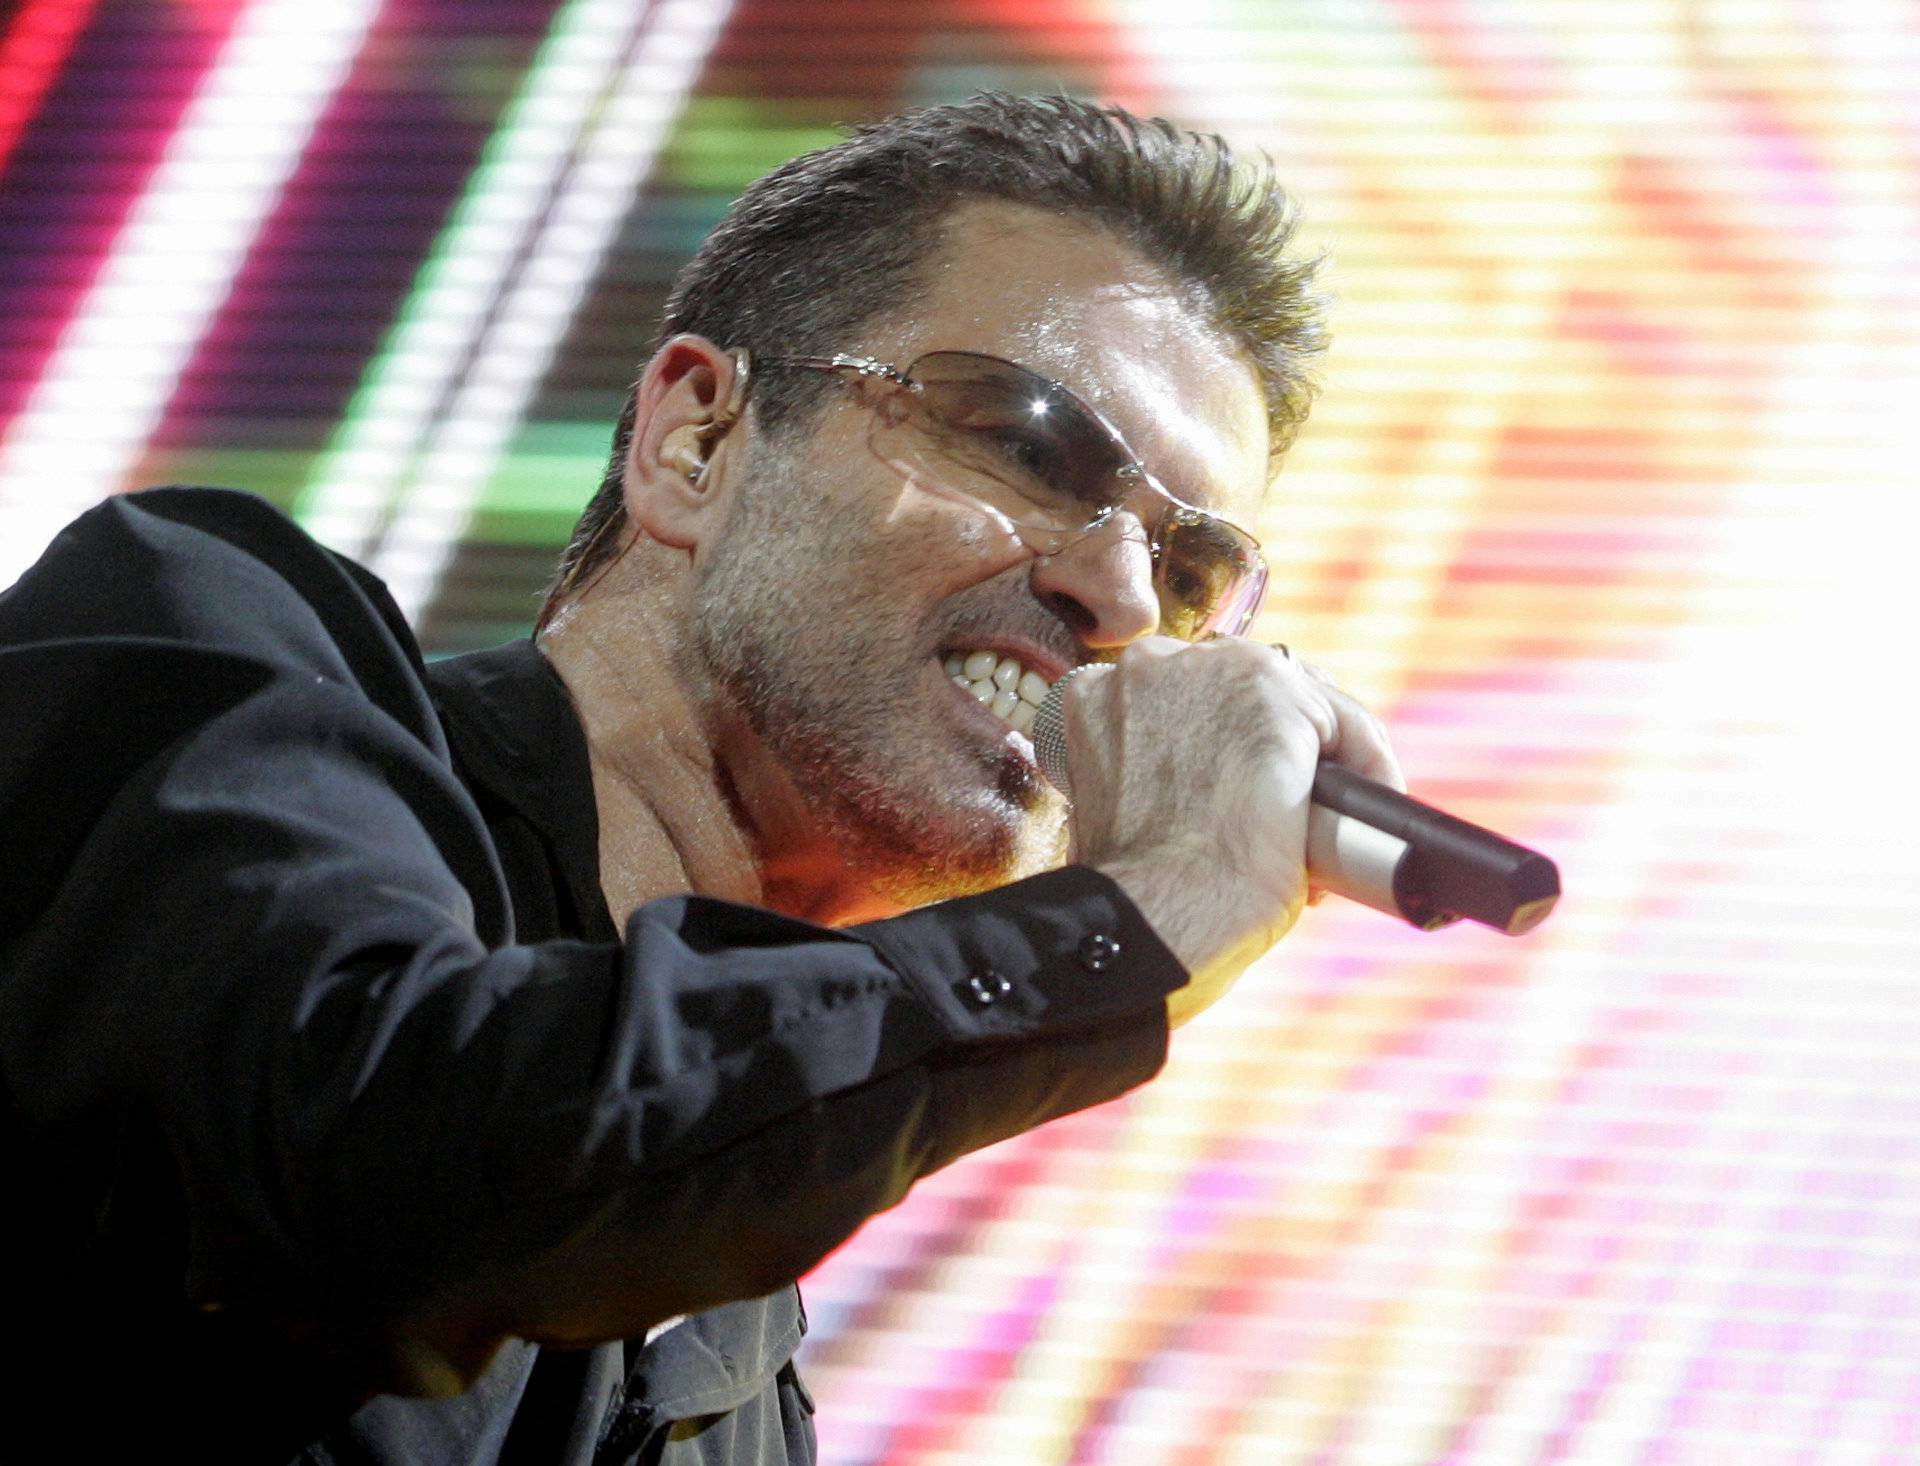 FILE PHOTO: Singer George Michael performs on stage during his "25 Live" world tour at the Bercy stadium in Paris